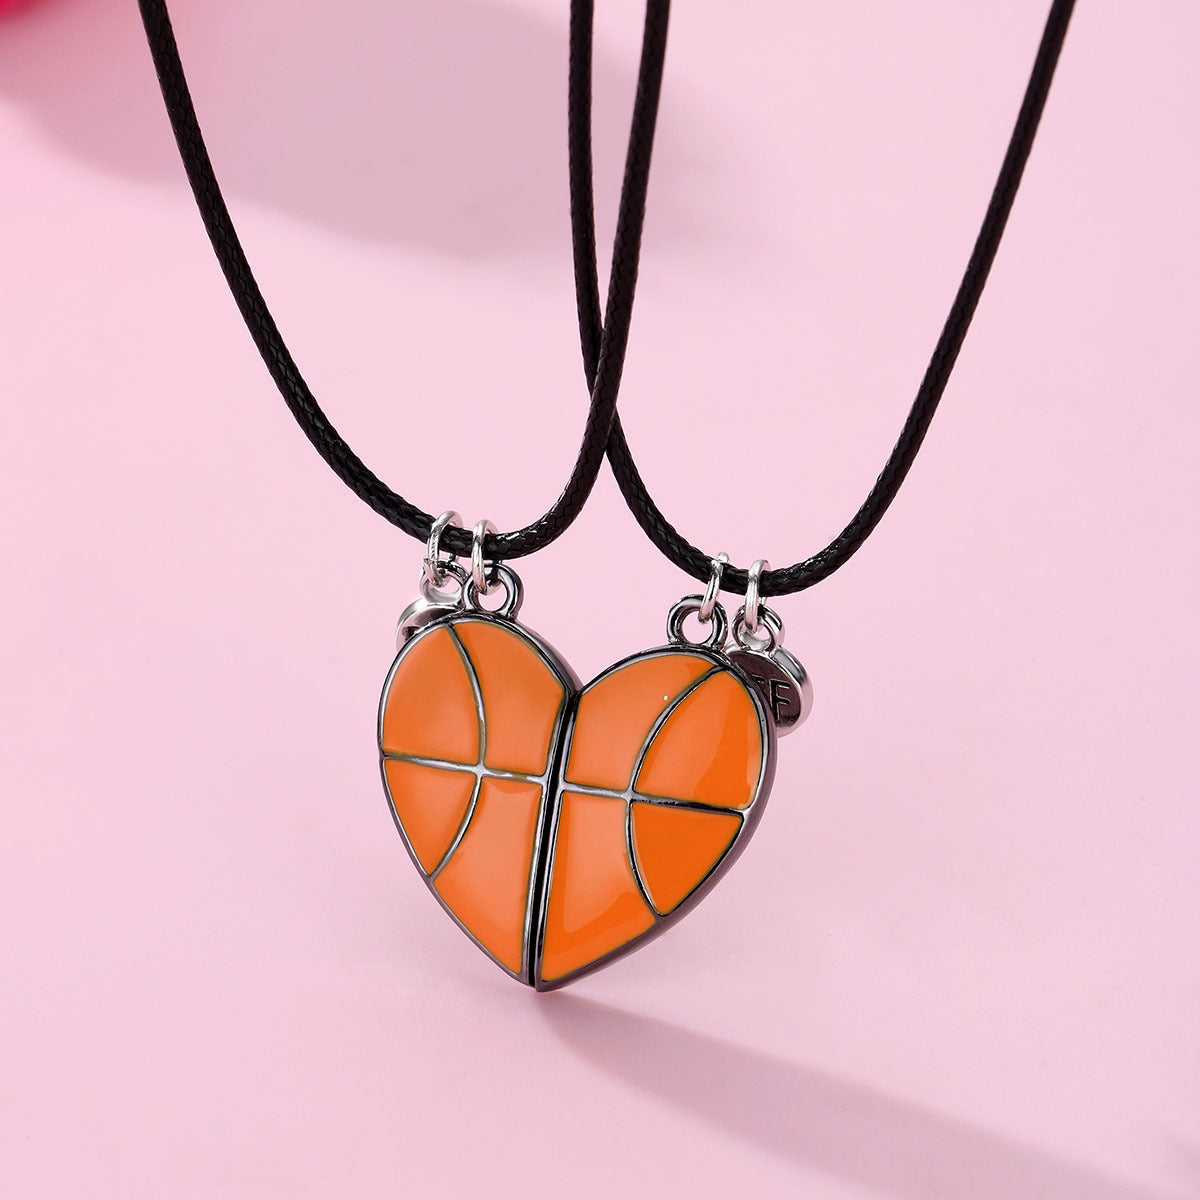 Magnetic Bff Friendship Necklaces Gift for Basketball Fans